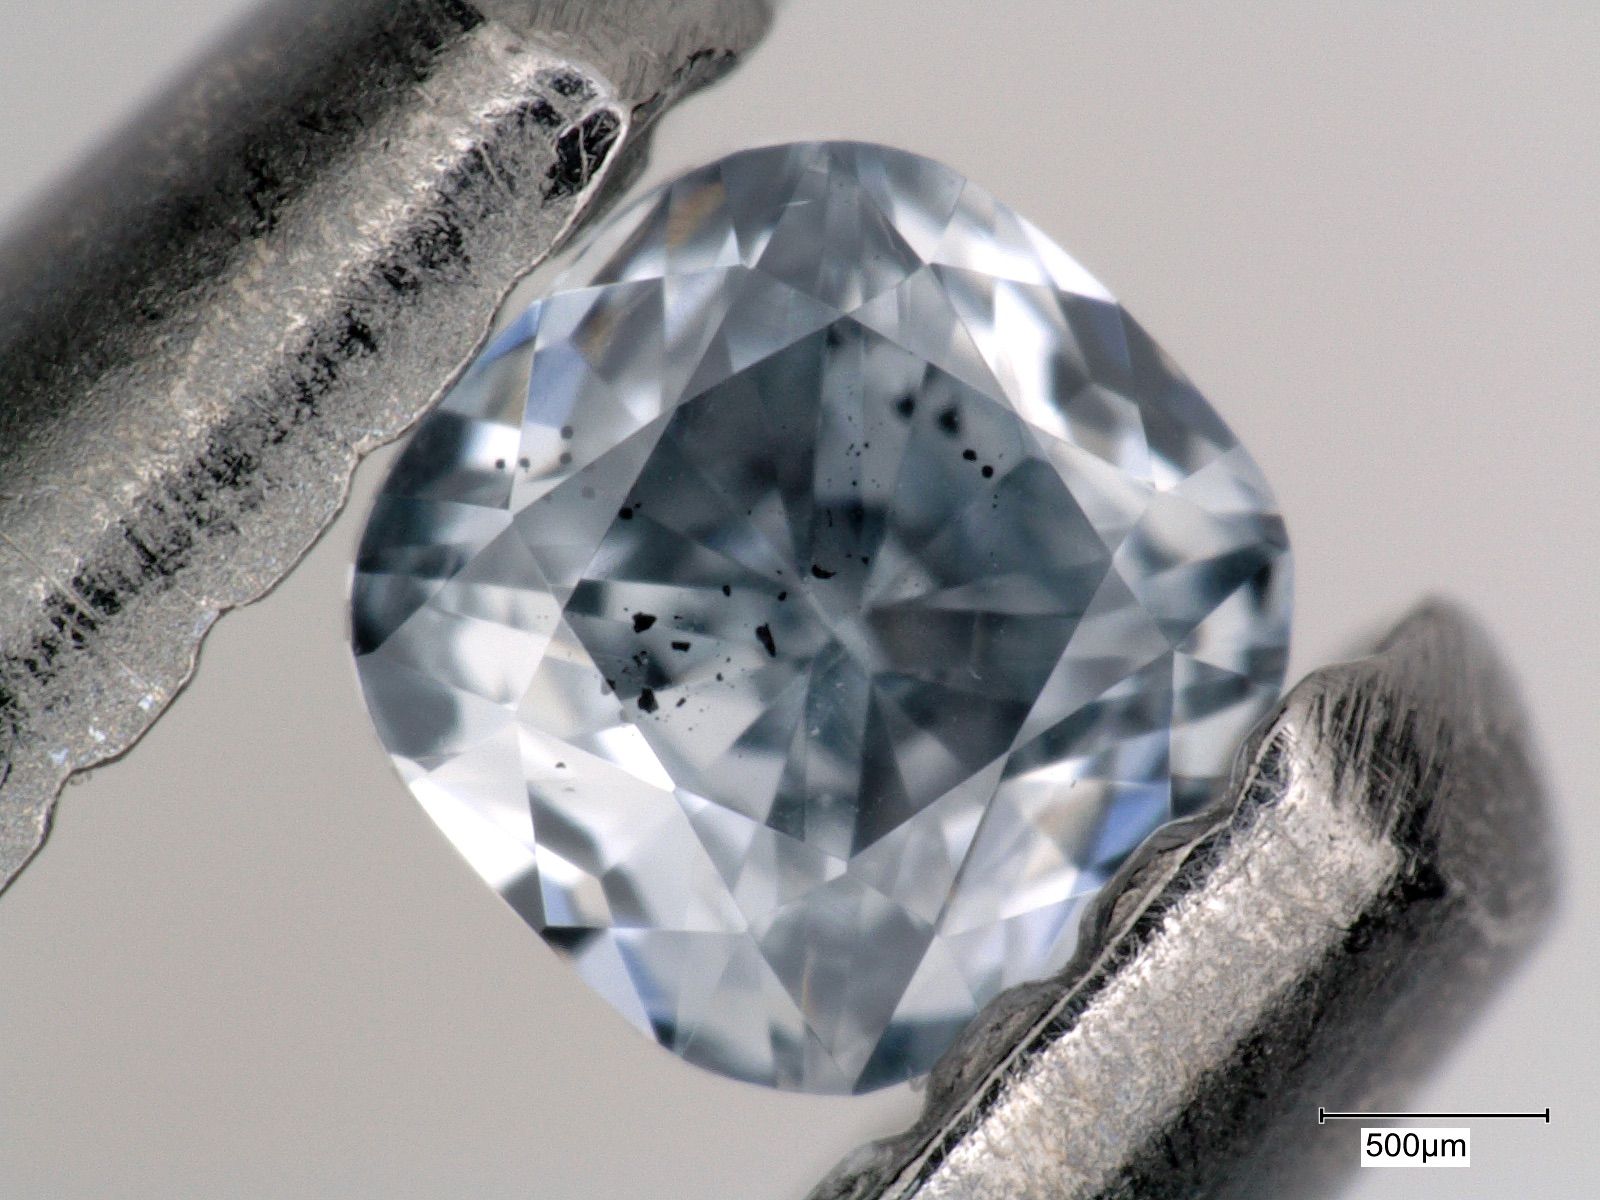 Imperfect Diamonds Paved Way to Historic New Deep Earth Discoveries. Deep Carbon Observatory